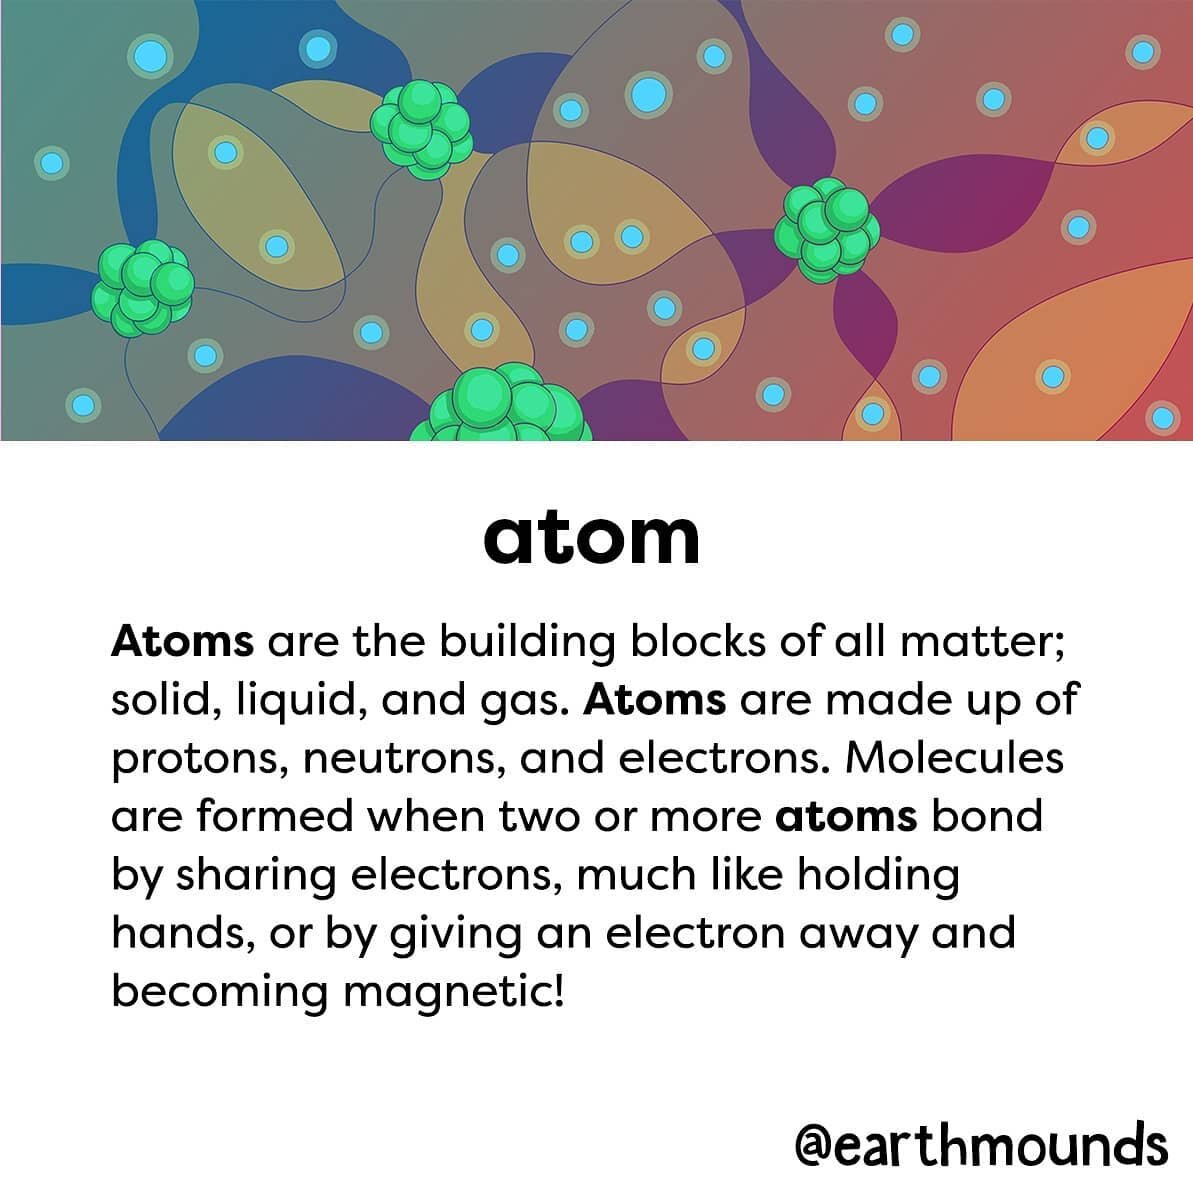 By volume, an atom is made up of mostly empty space. Less than a billionth of an atom is its nucleus and electrons.